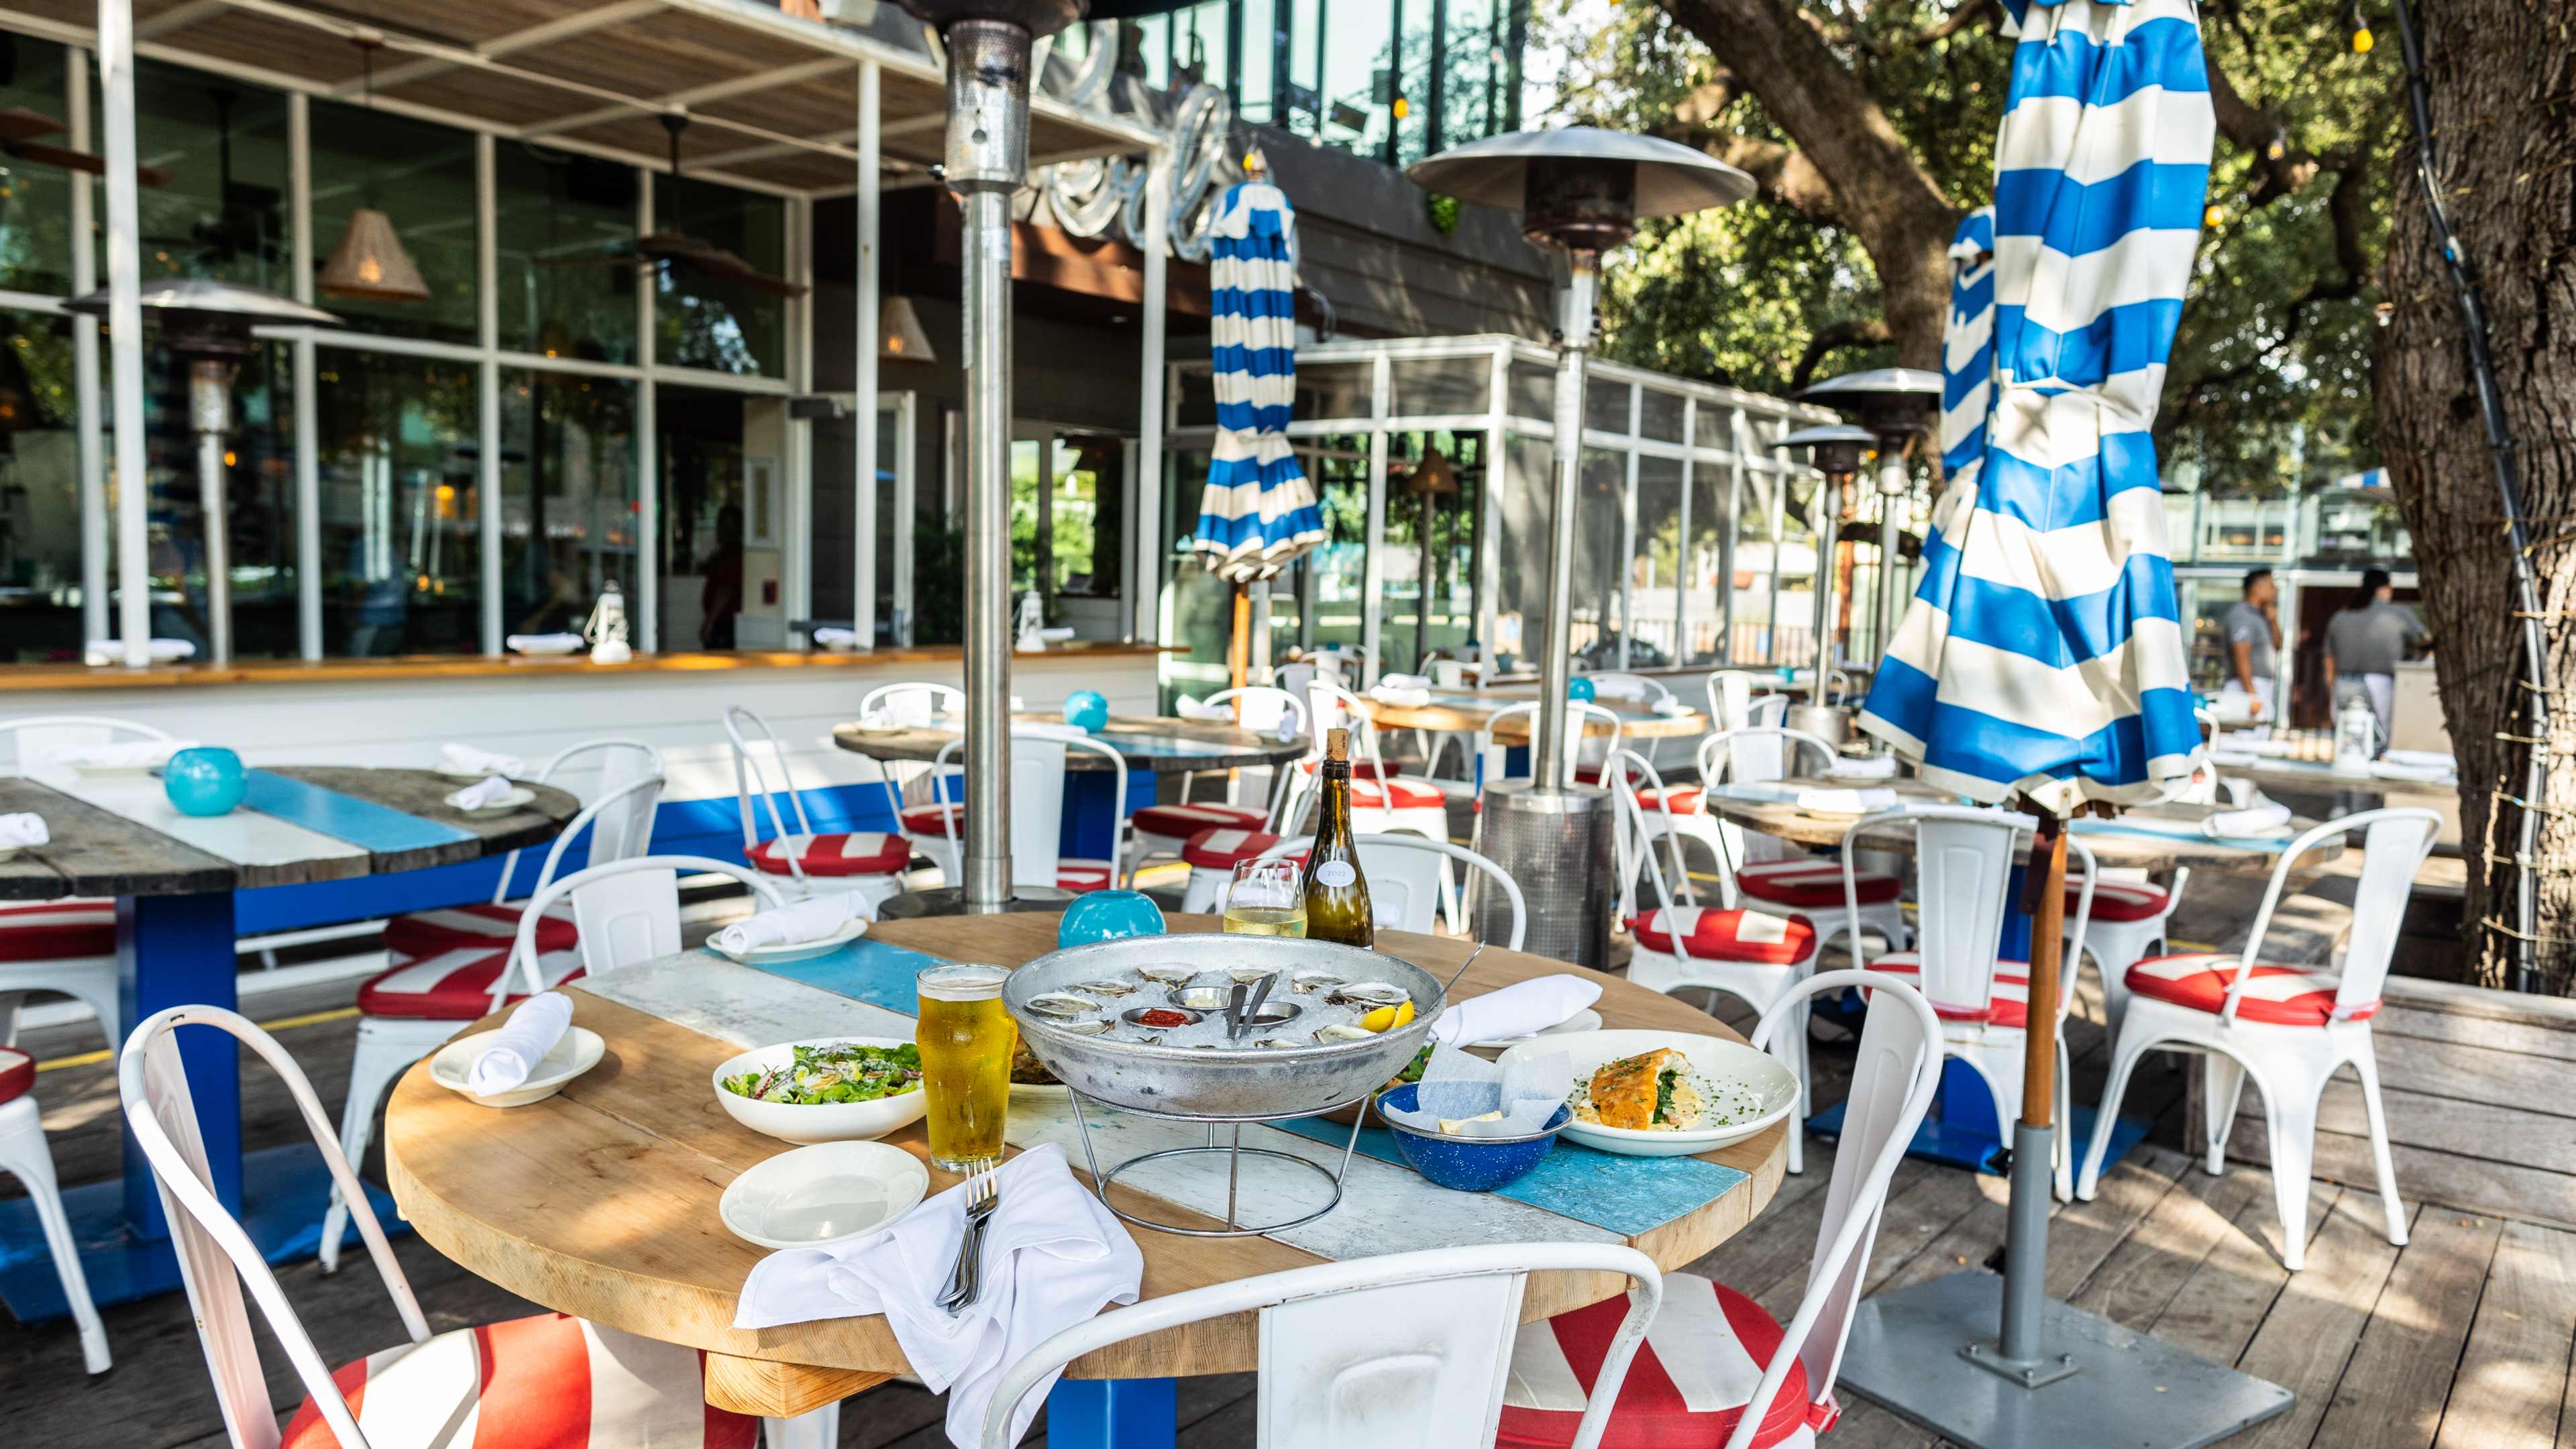 The patio at Perla's with blue and white striped umbrellas, heaters, red cushioned white chairs, and a spread of dishes on the table in the foreground.